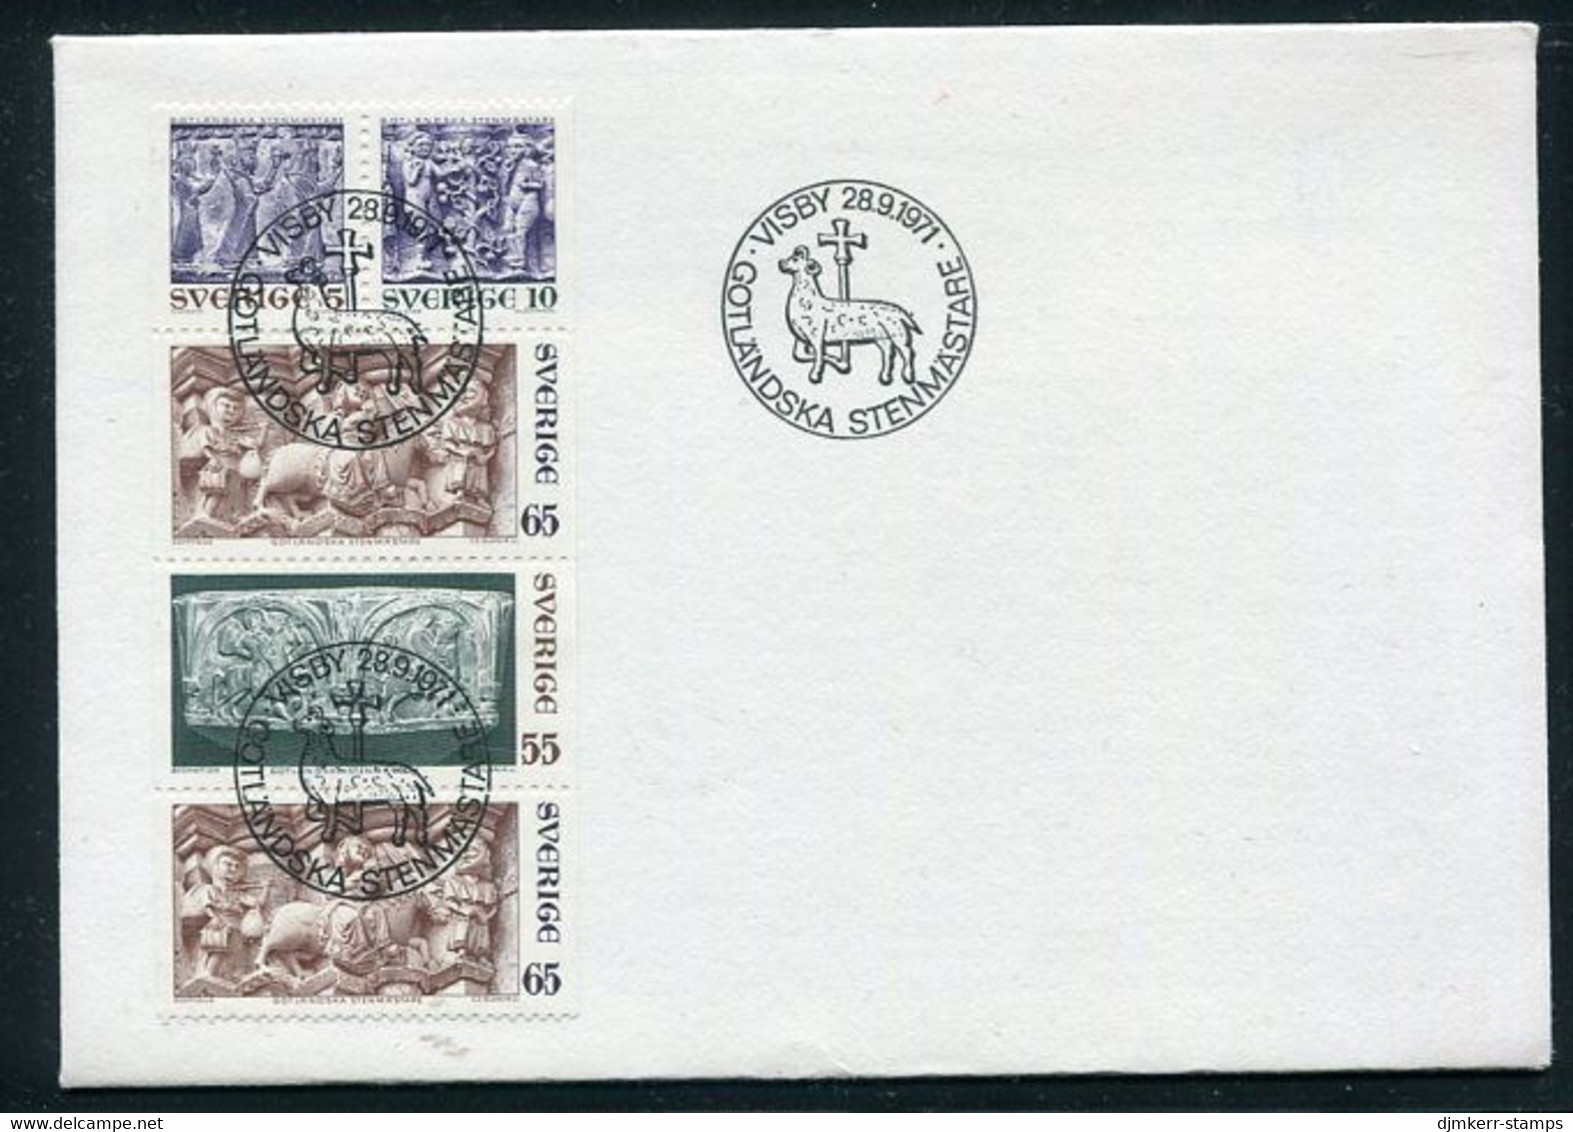 SWEDEN 1971 Gotland Stone Carvings FDC.  Michel 717-20 - FDC